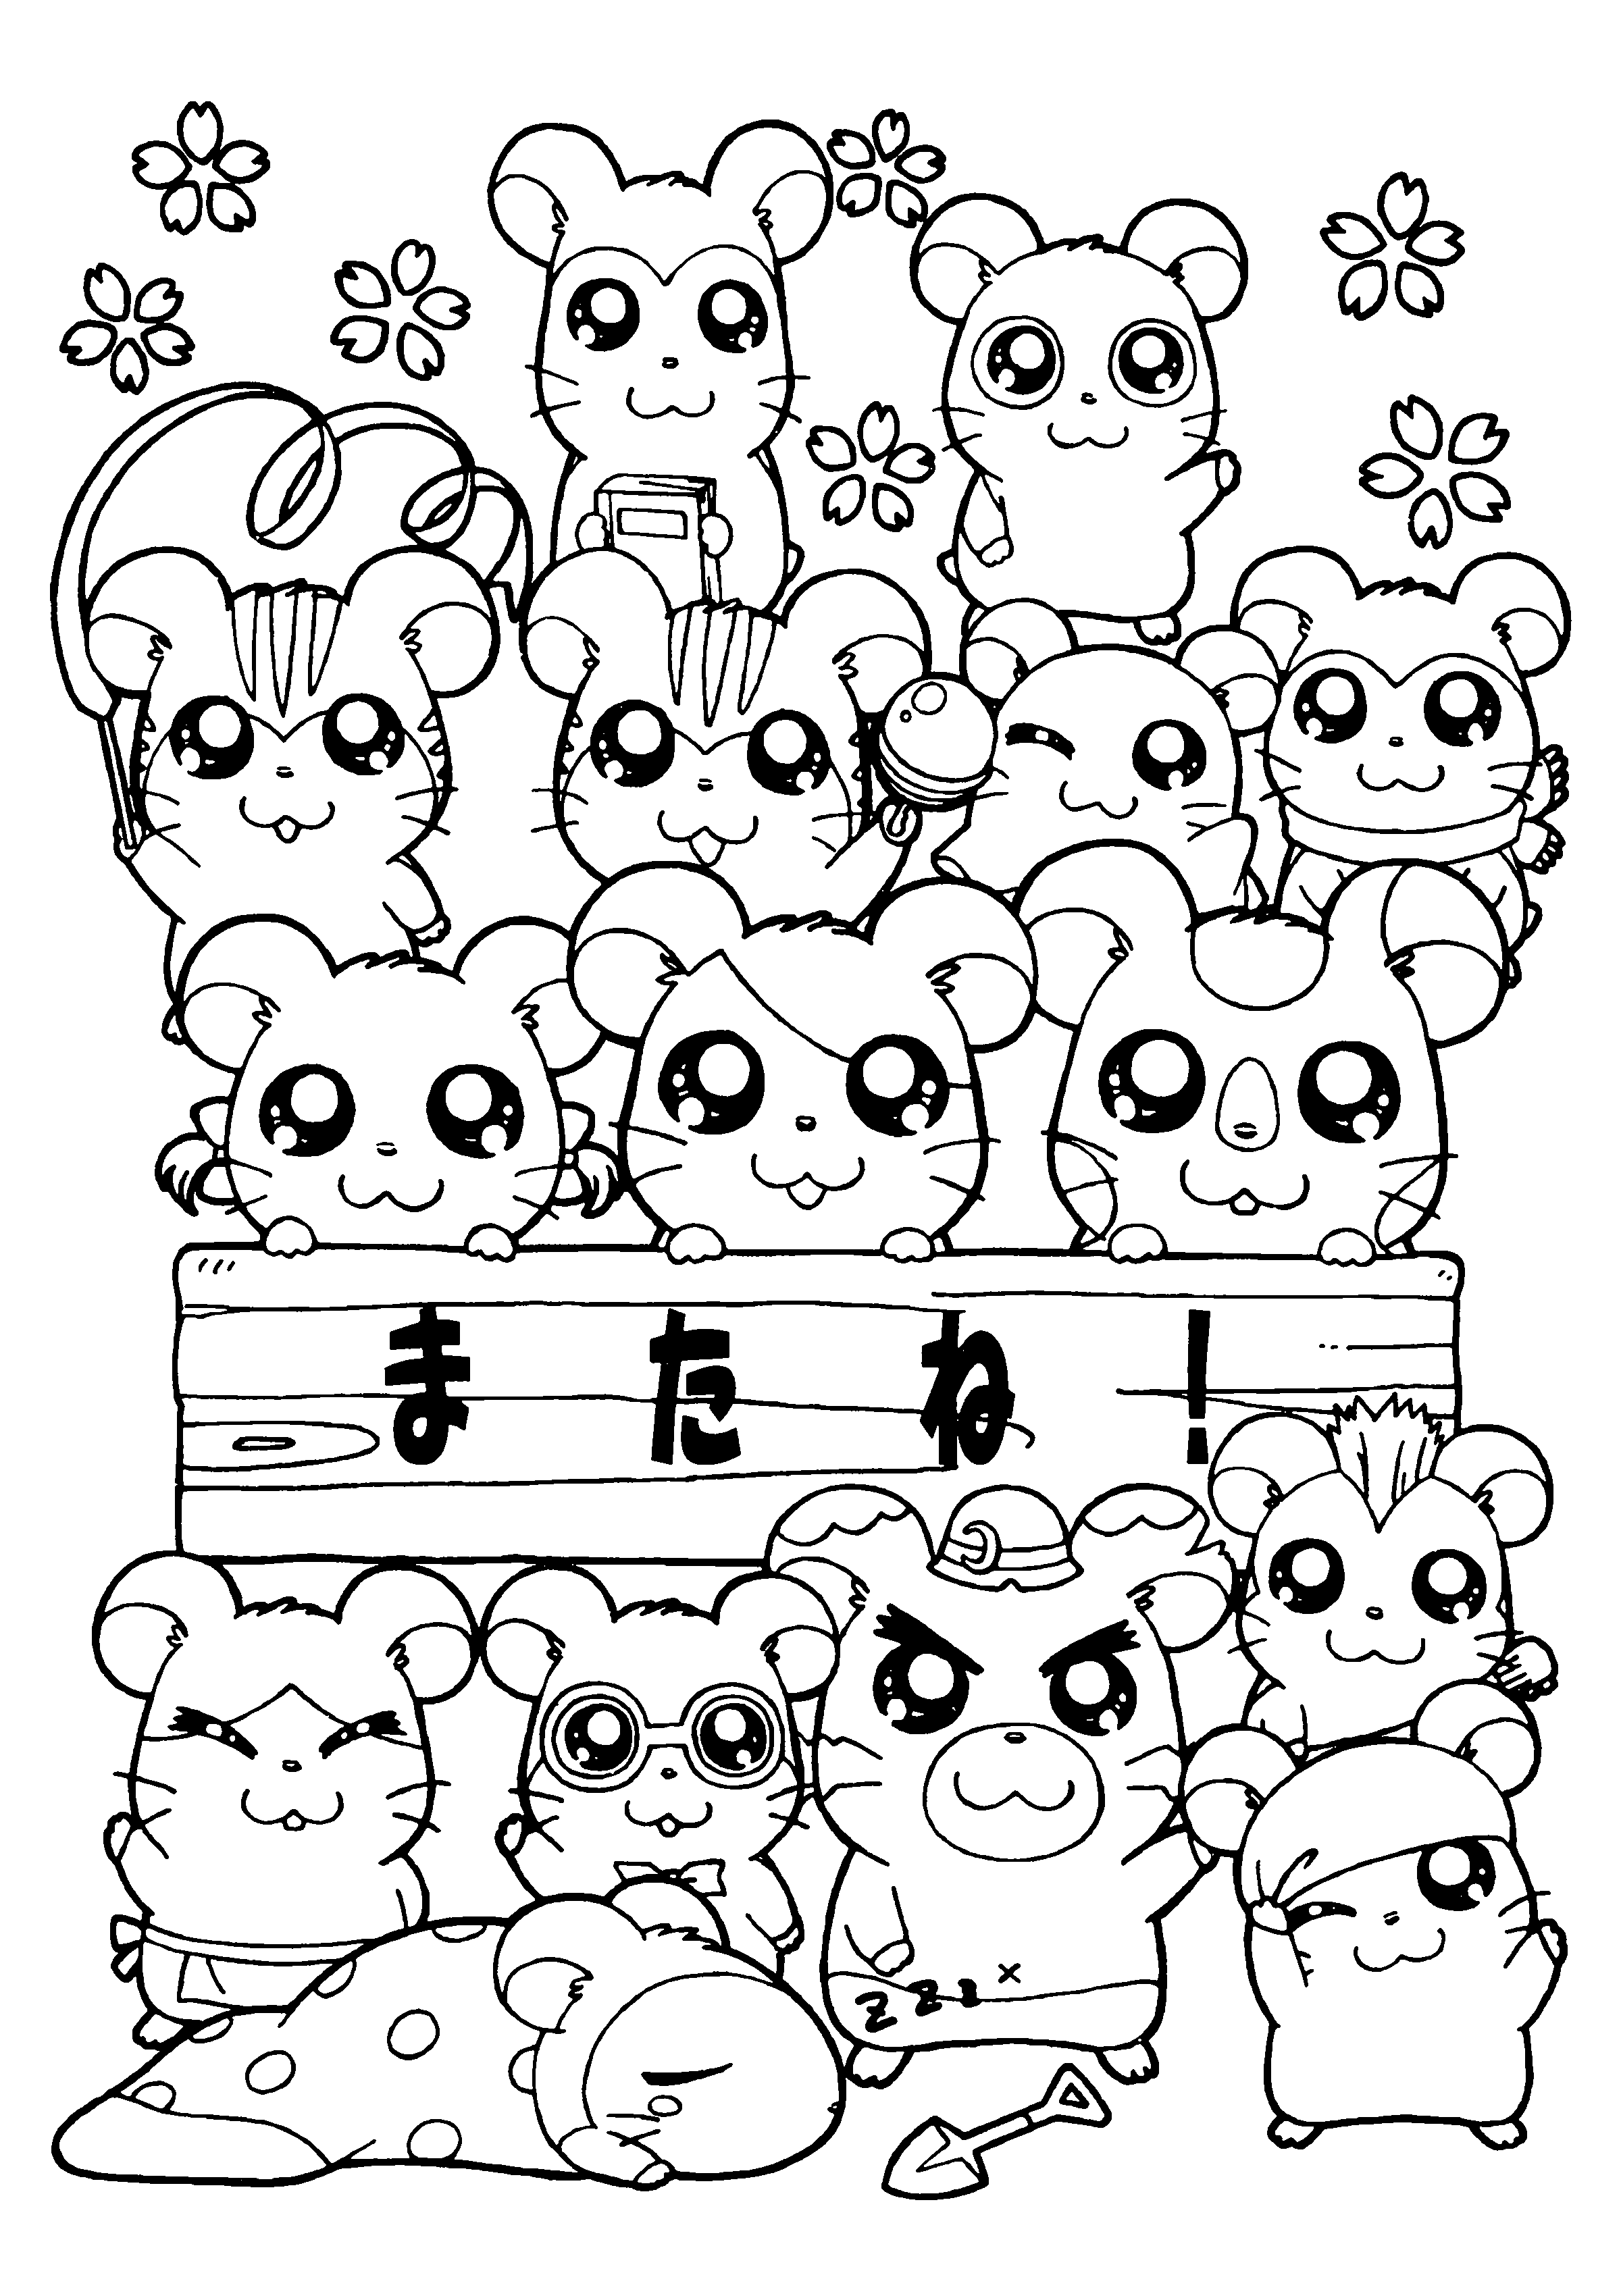 Hamtaro 39924 Cartoons Free Printable Coloring Pages